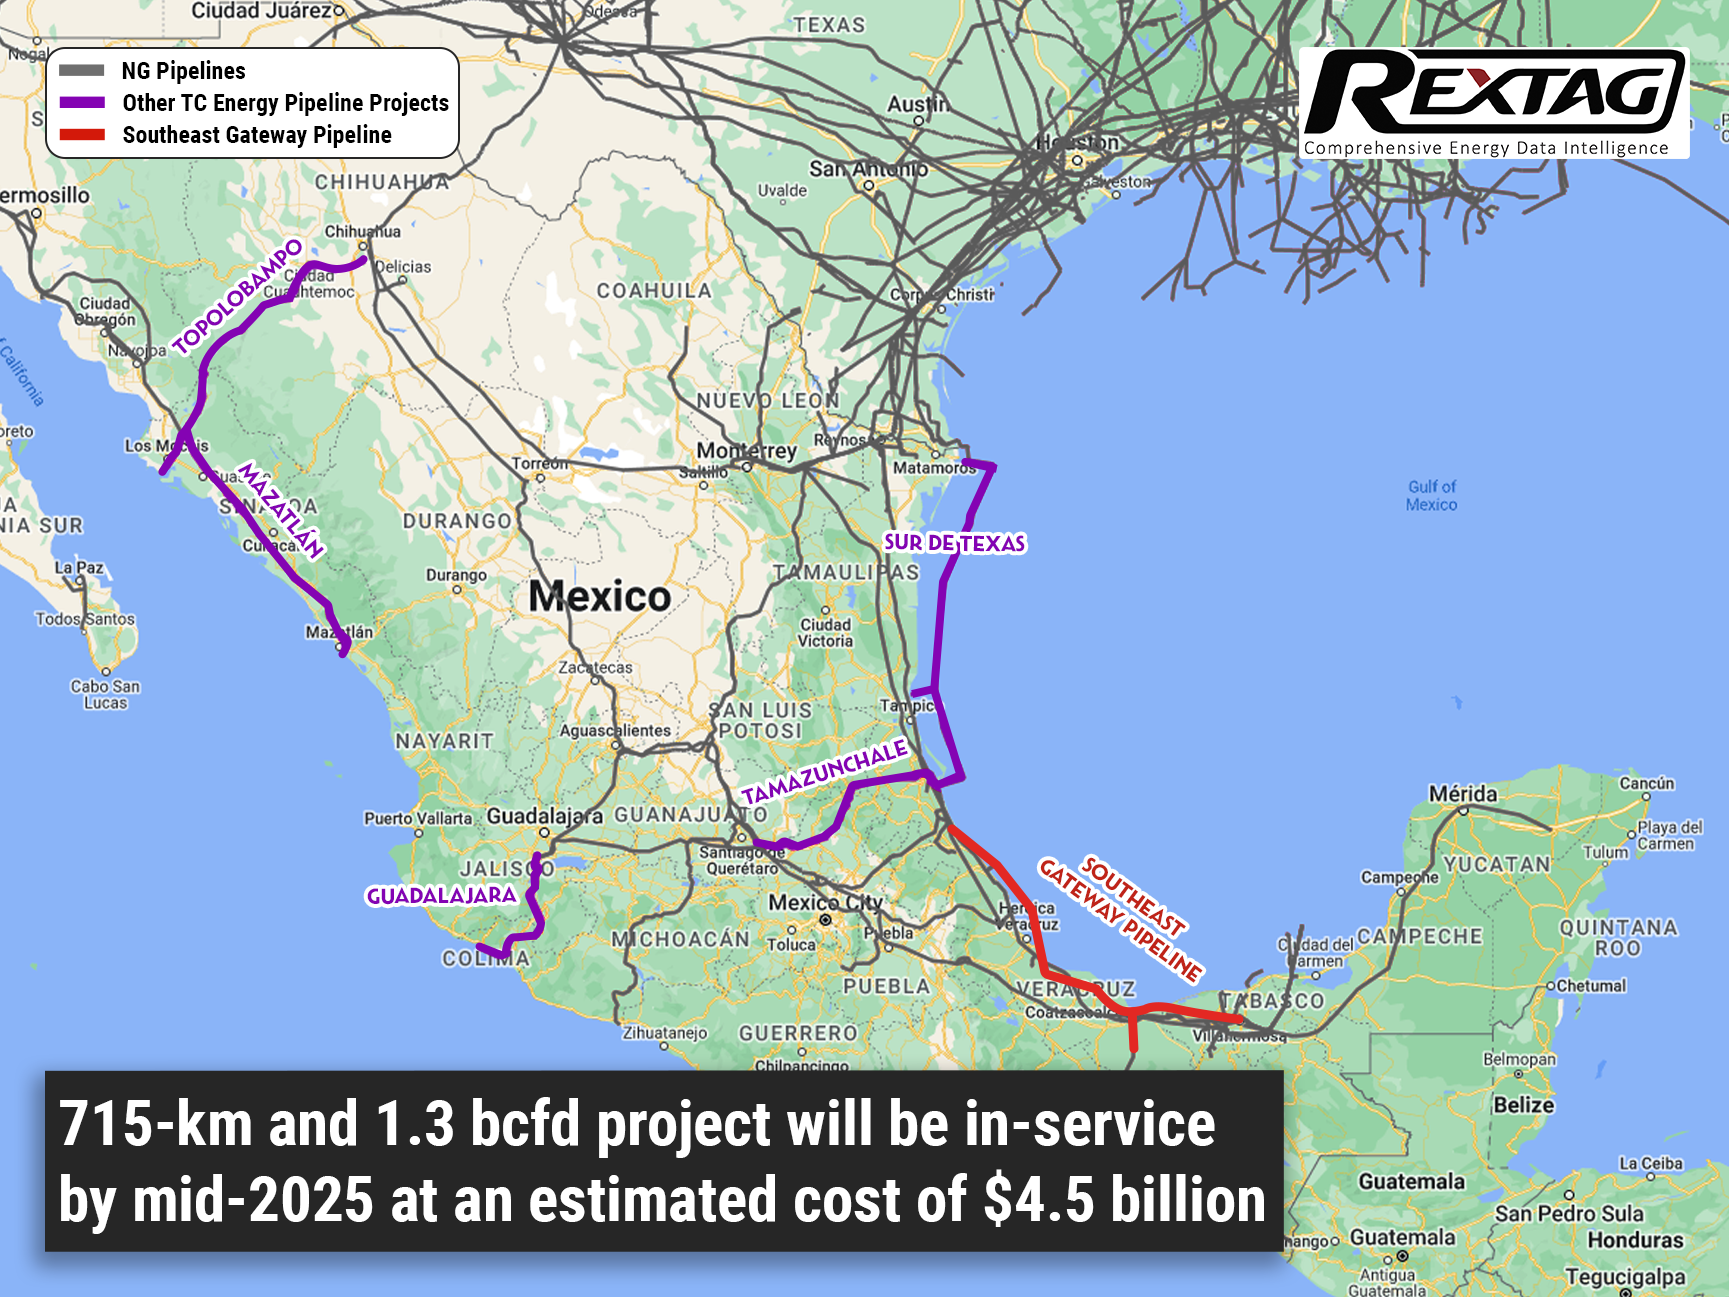 The-Deal-between-TC-Energy-and-Mexican-Utility-is-Concluded-to-Build-4.5-Billion-Gas-Pipeline 